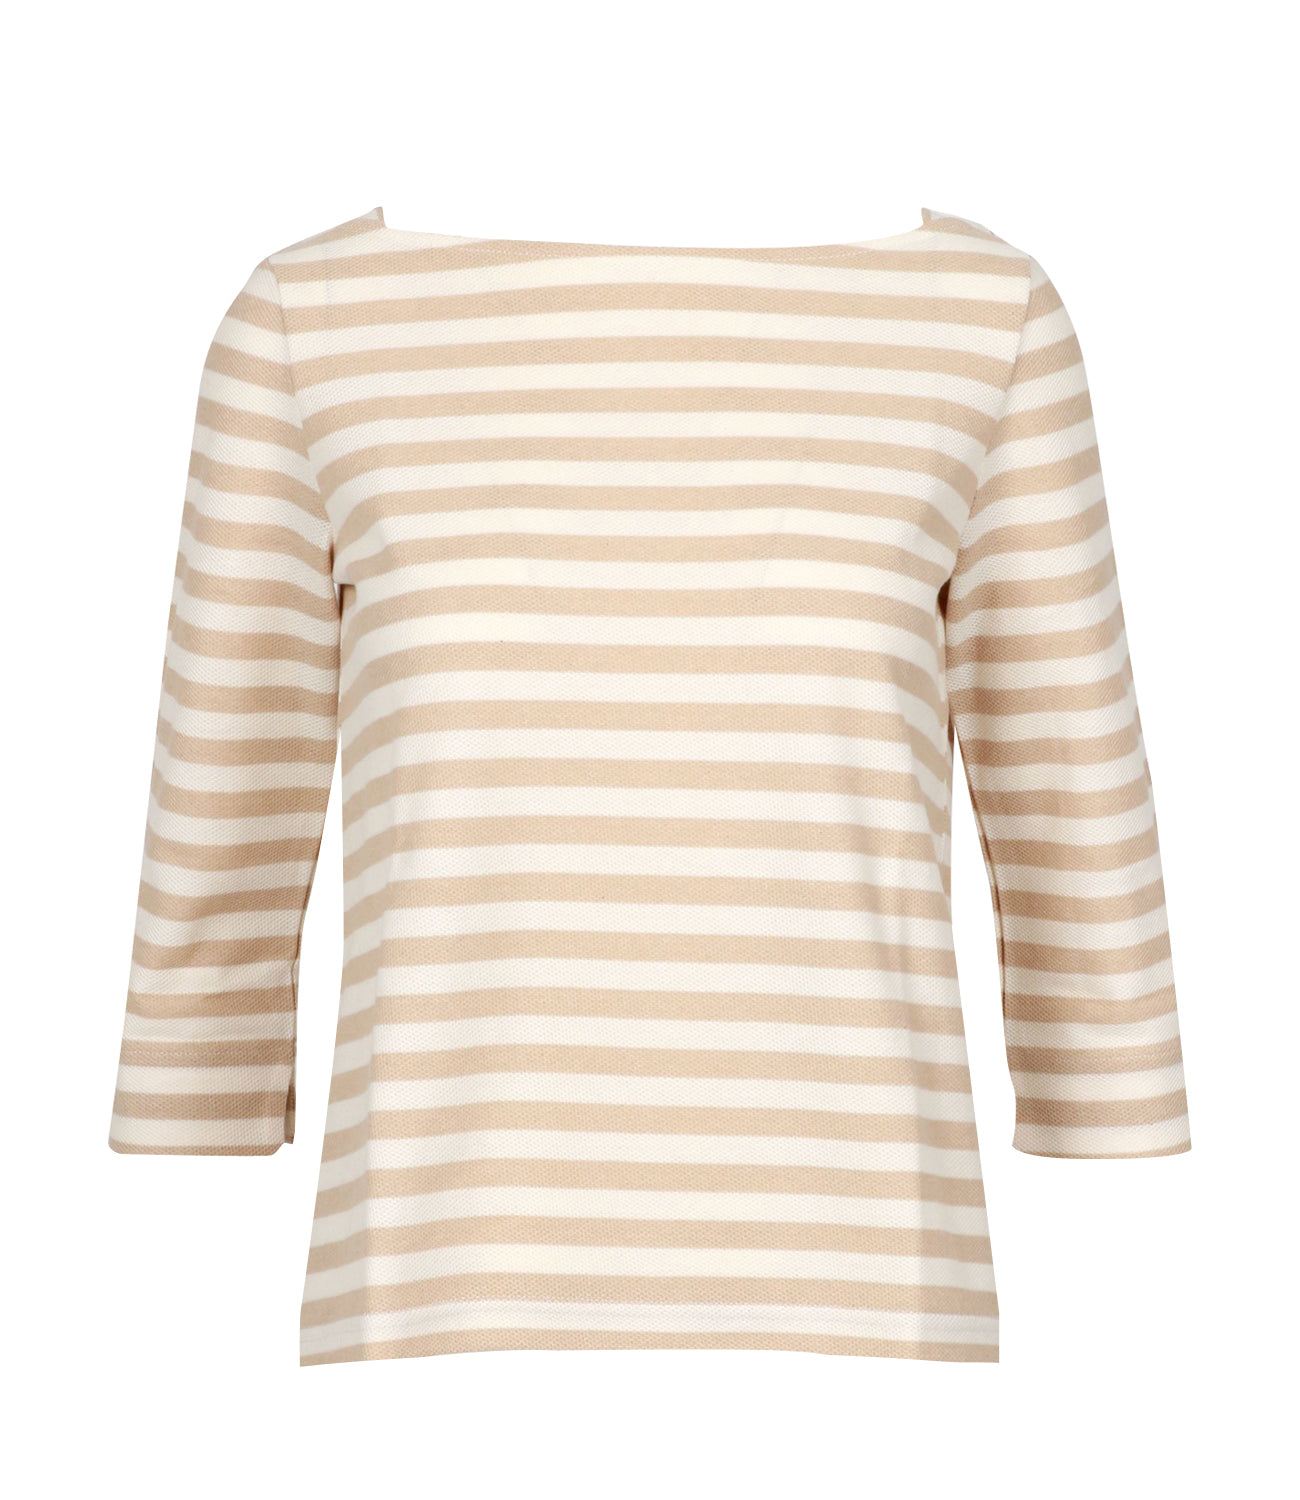 Pennyblack | Winter Sand and Ivory T-Shirt